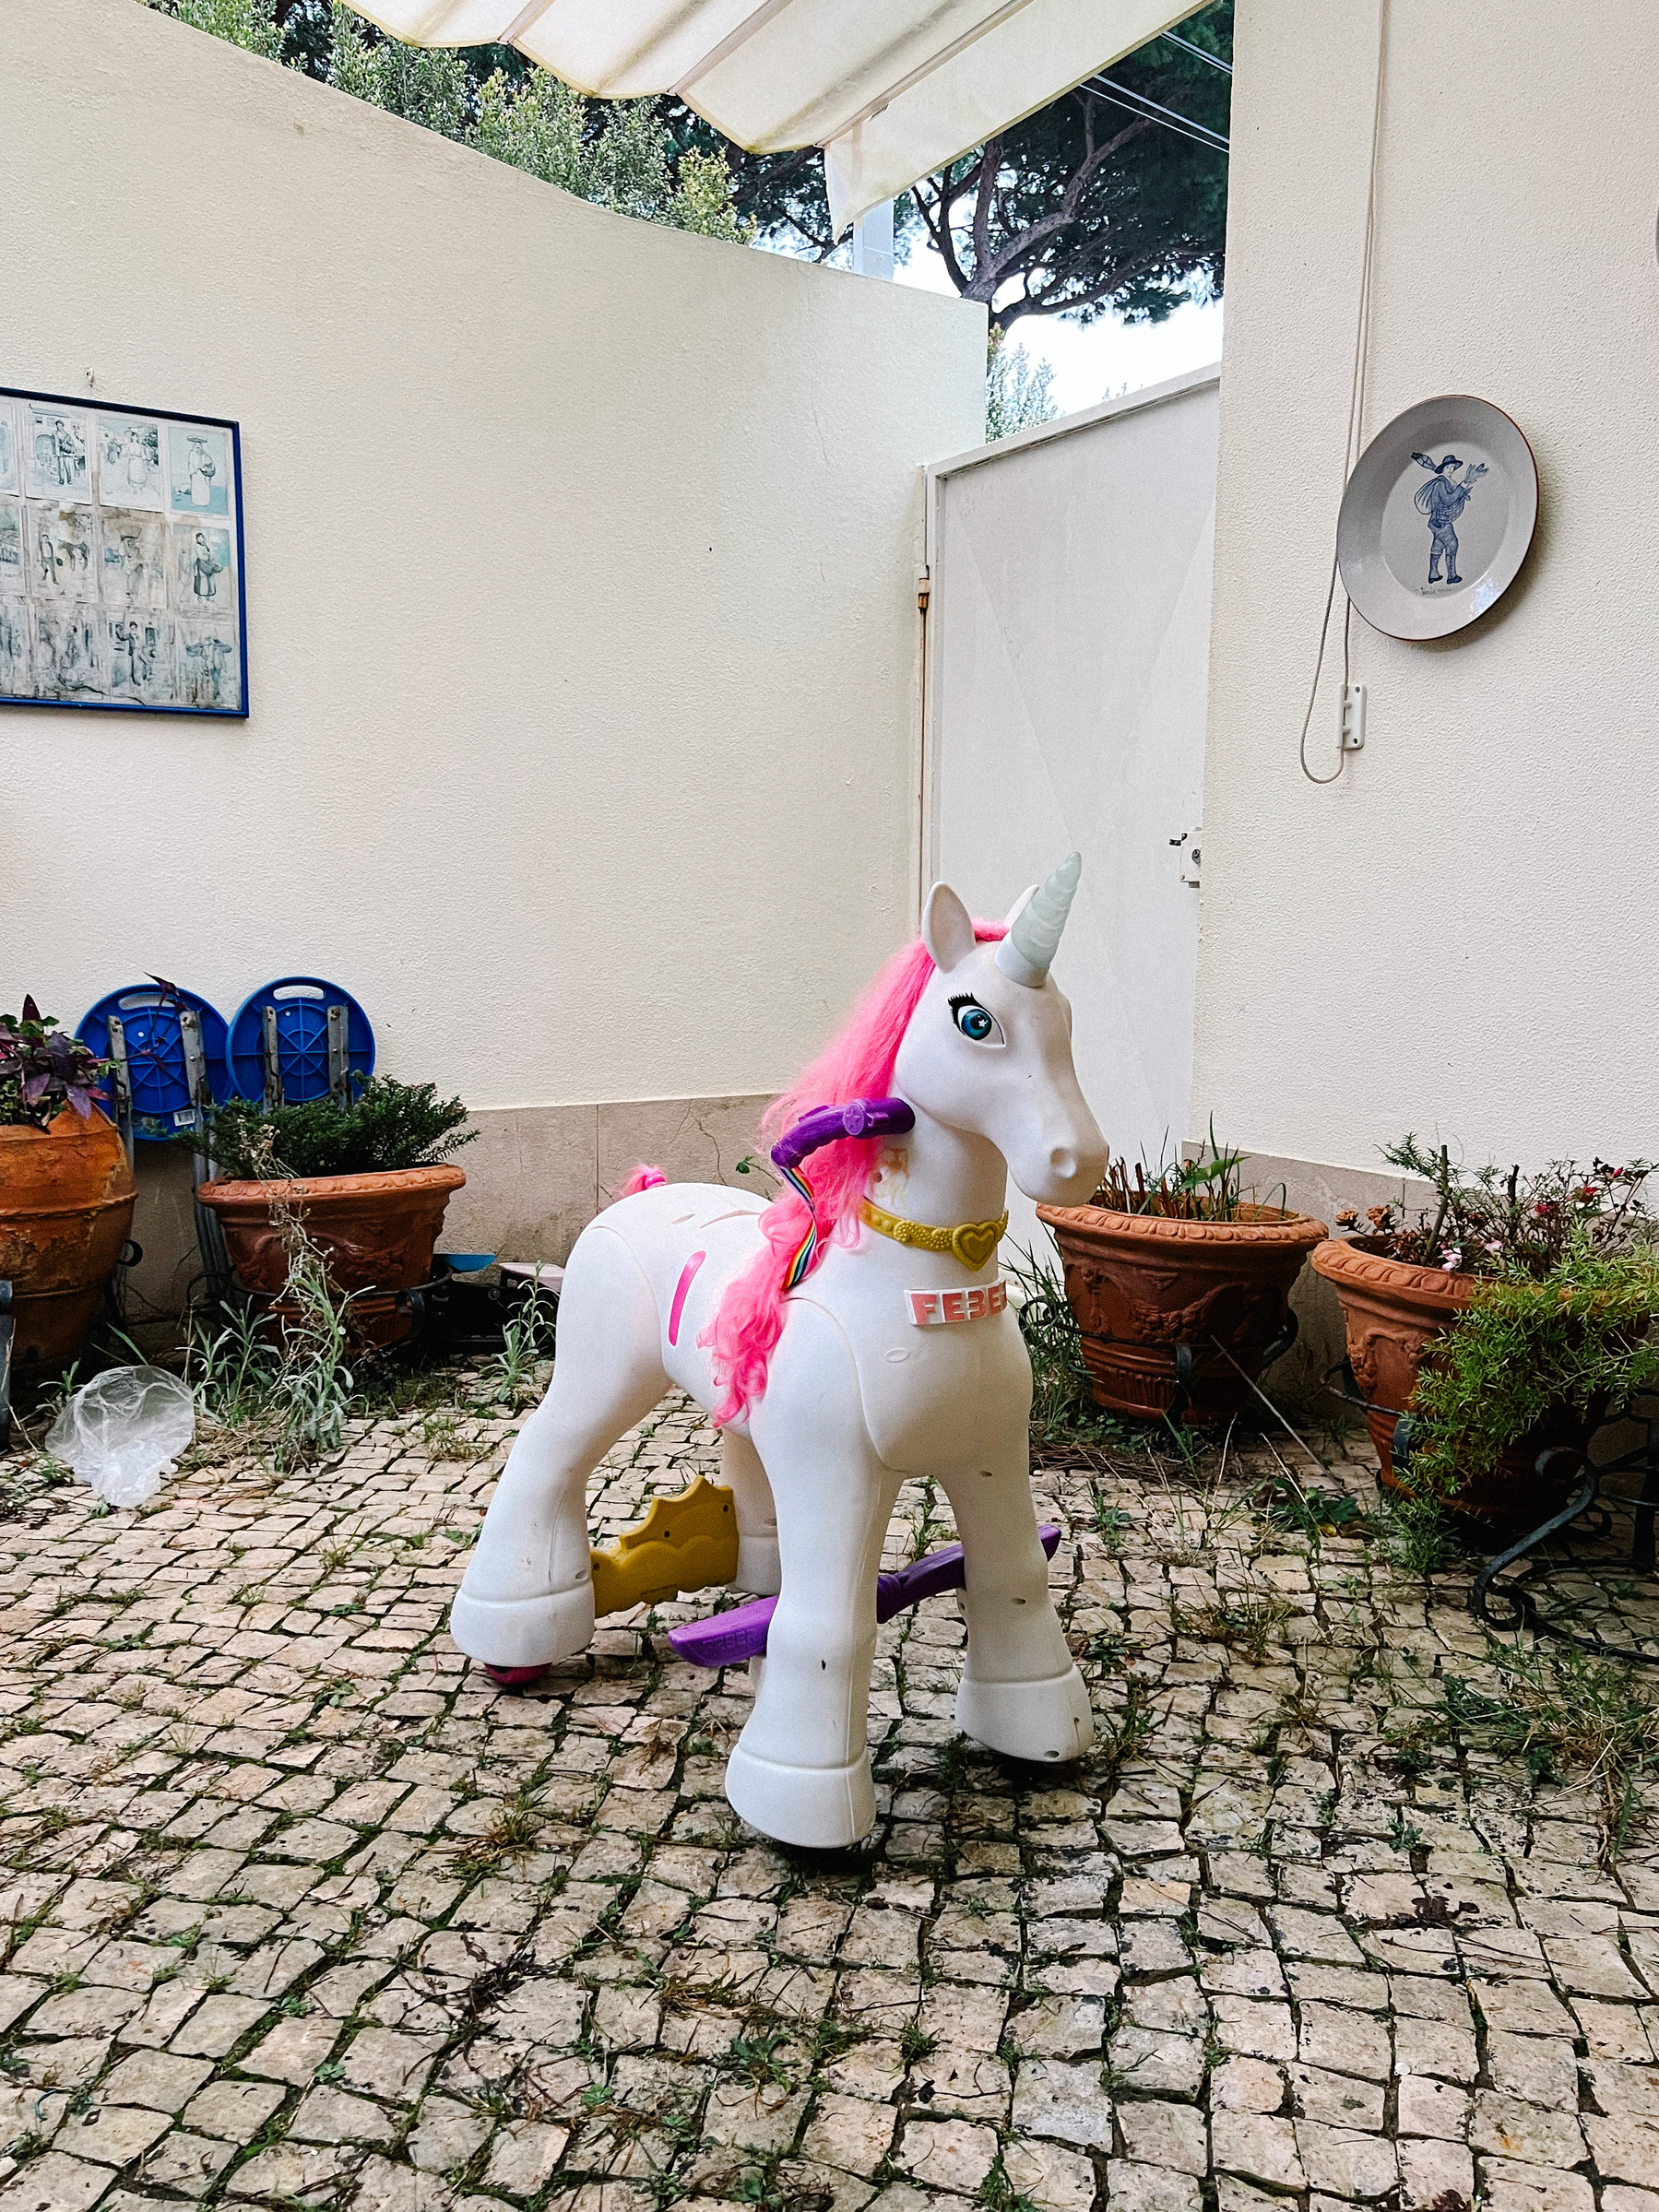 A child&rsquo;s ride-on unicorn toy with a pink mane in a courtyard with cobblestone flooring, surrounded by potted plants, a white awning, and house walls with decorative items.